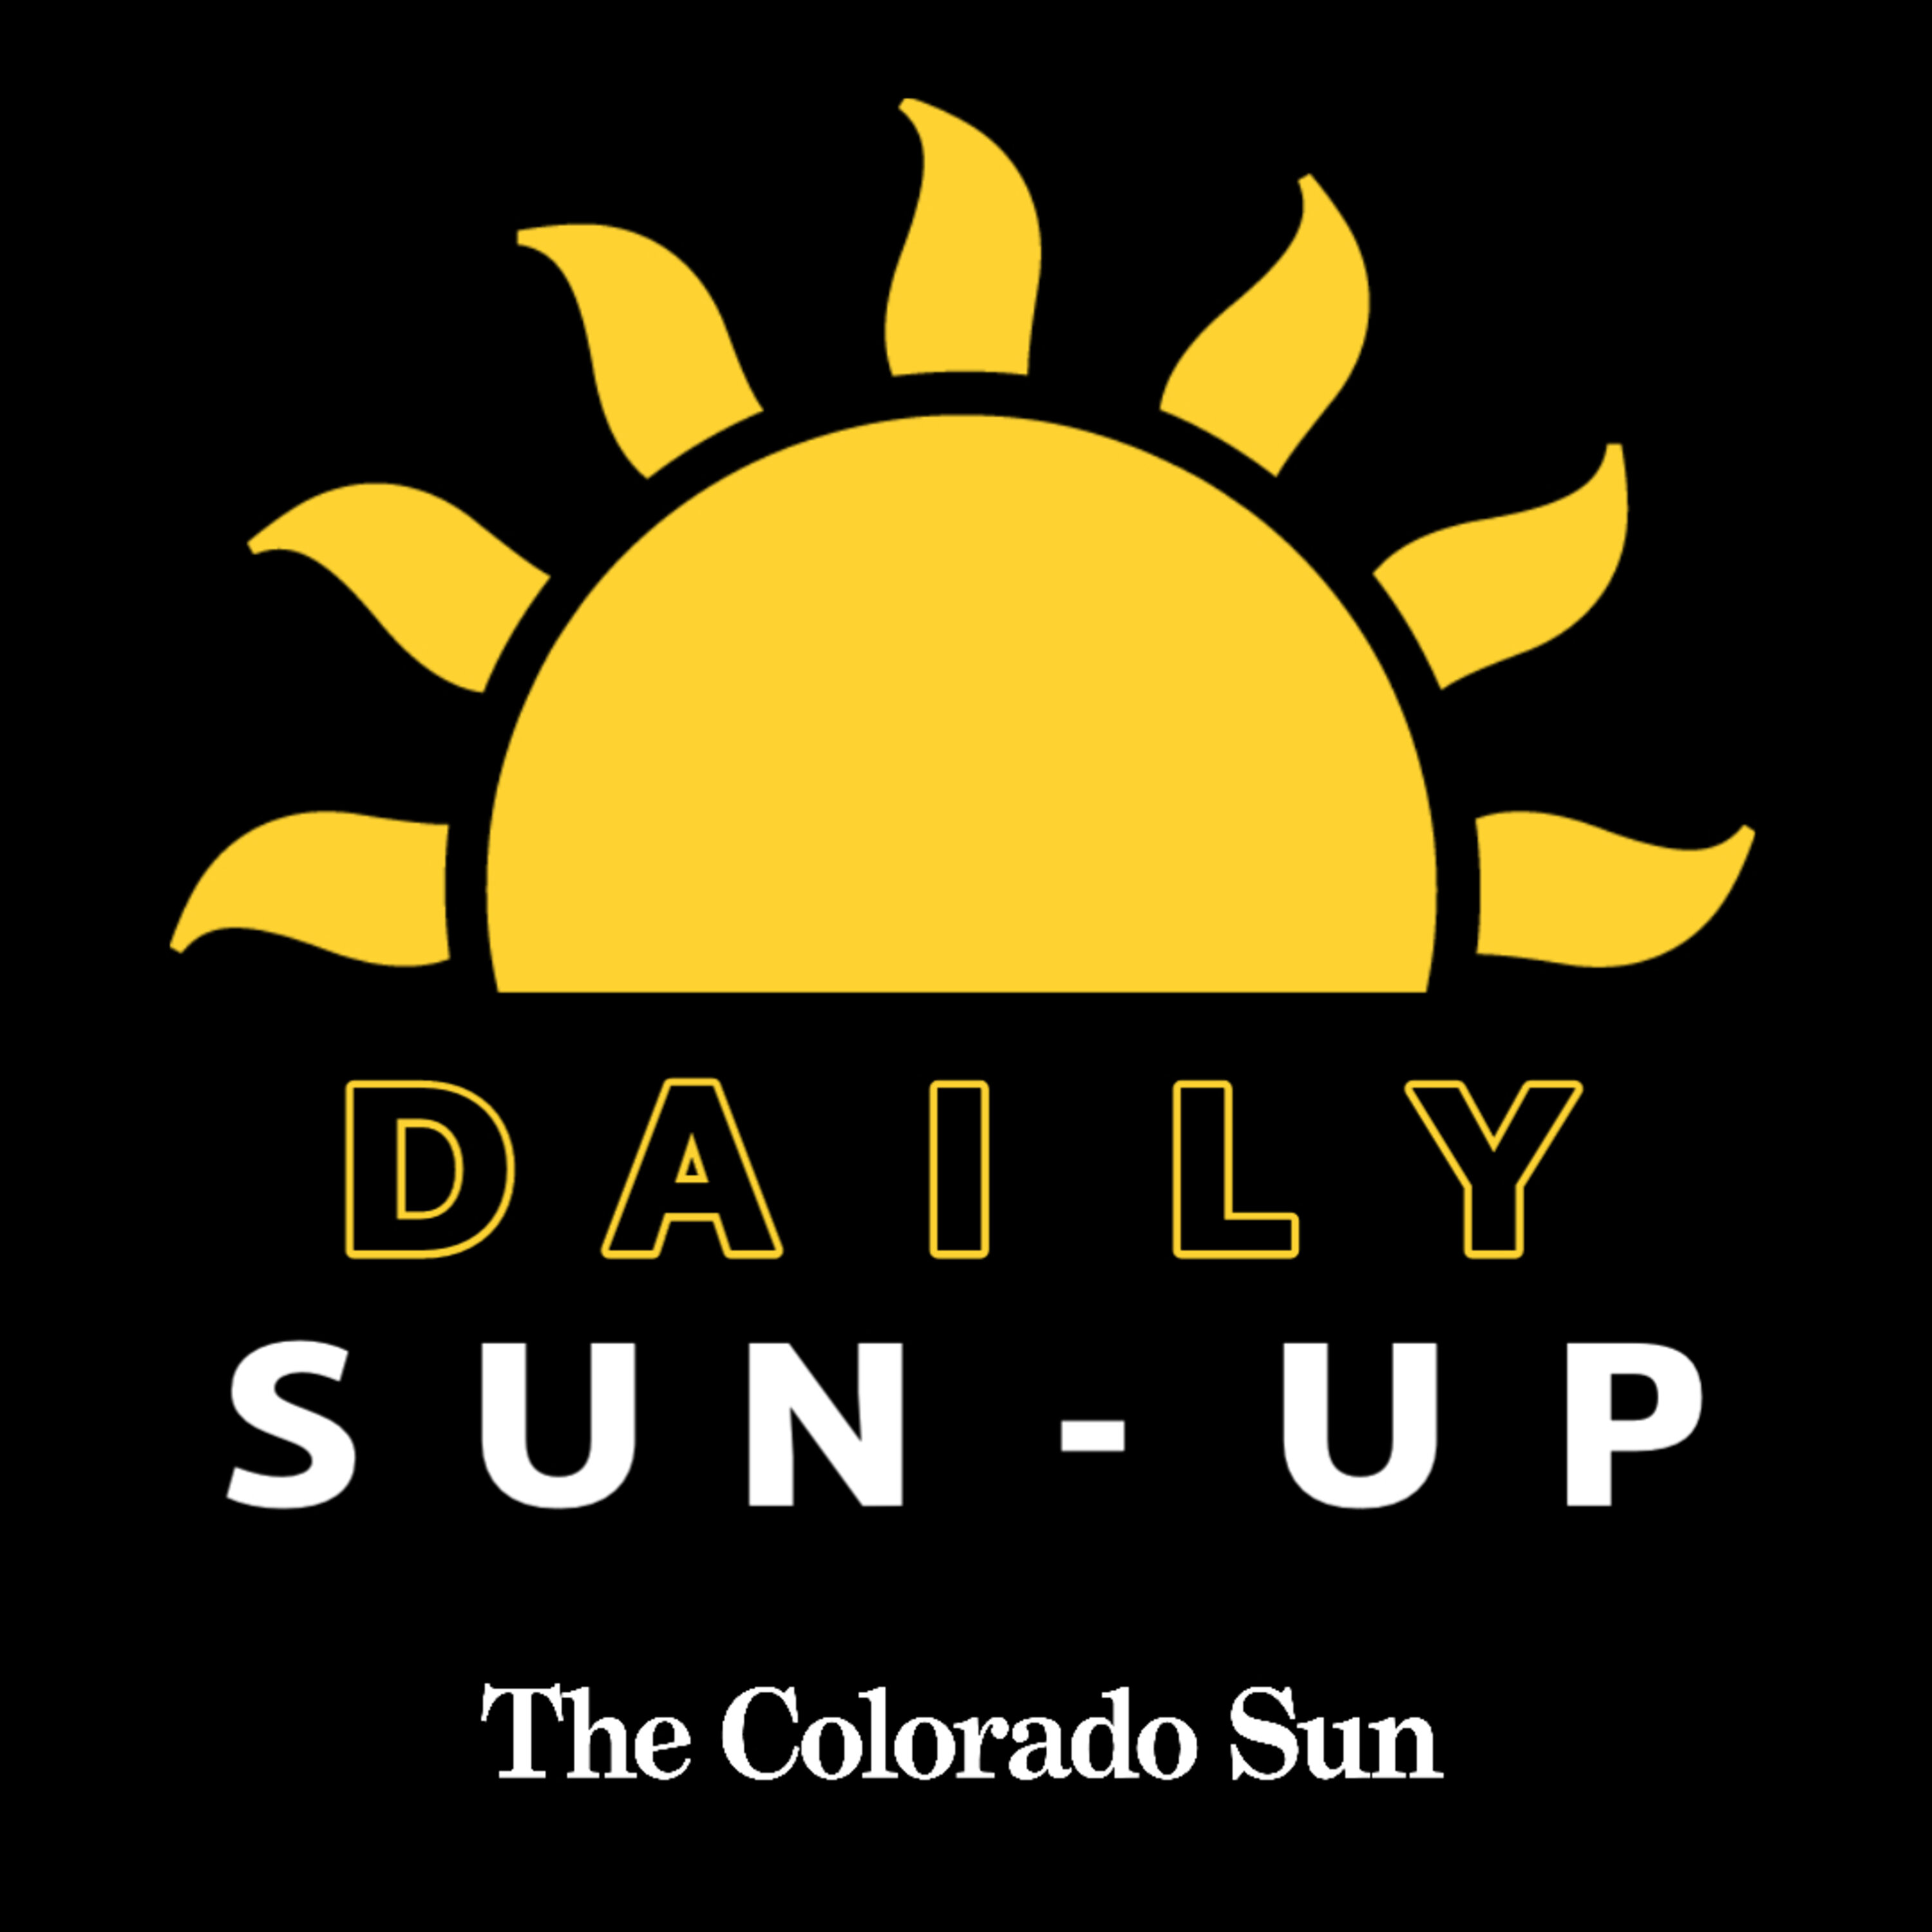 Colorado Sun Daily Sun-Up: For many Coloradans climate change is affecting them now; The Denver Coliseum